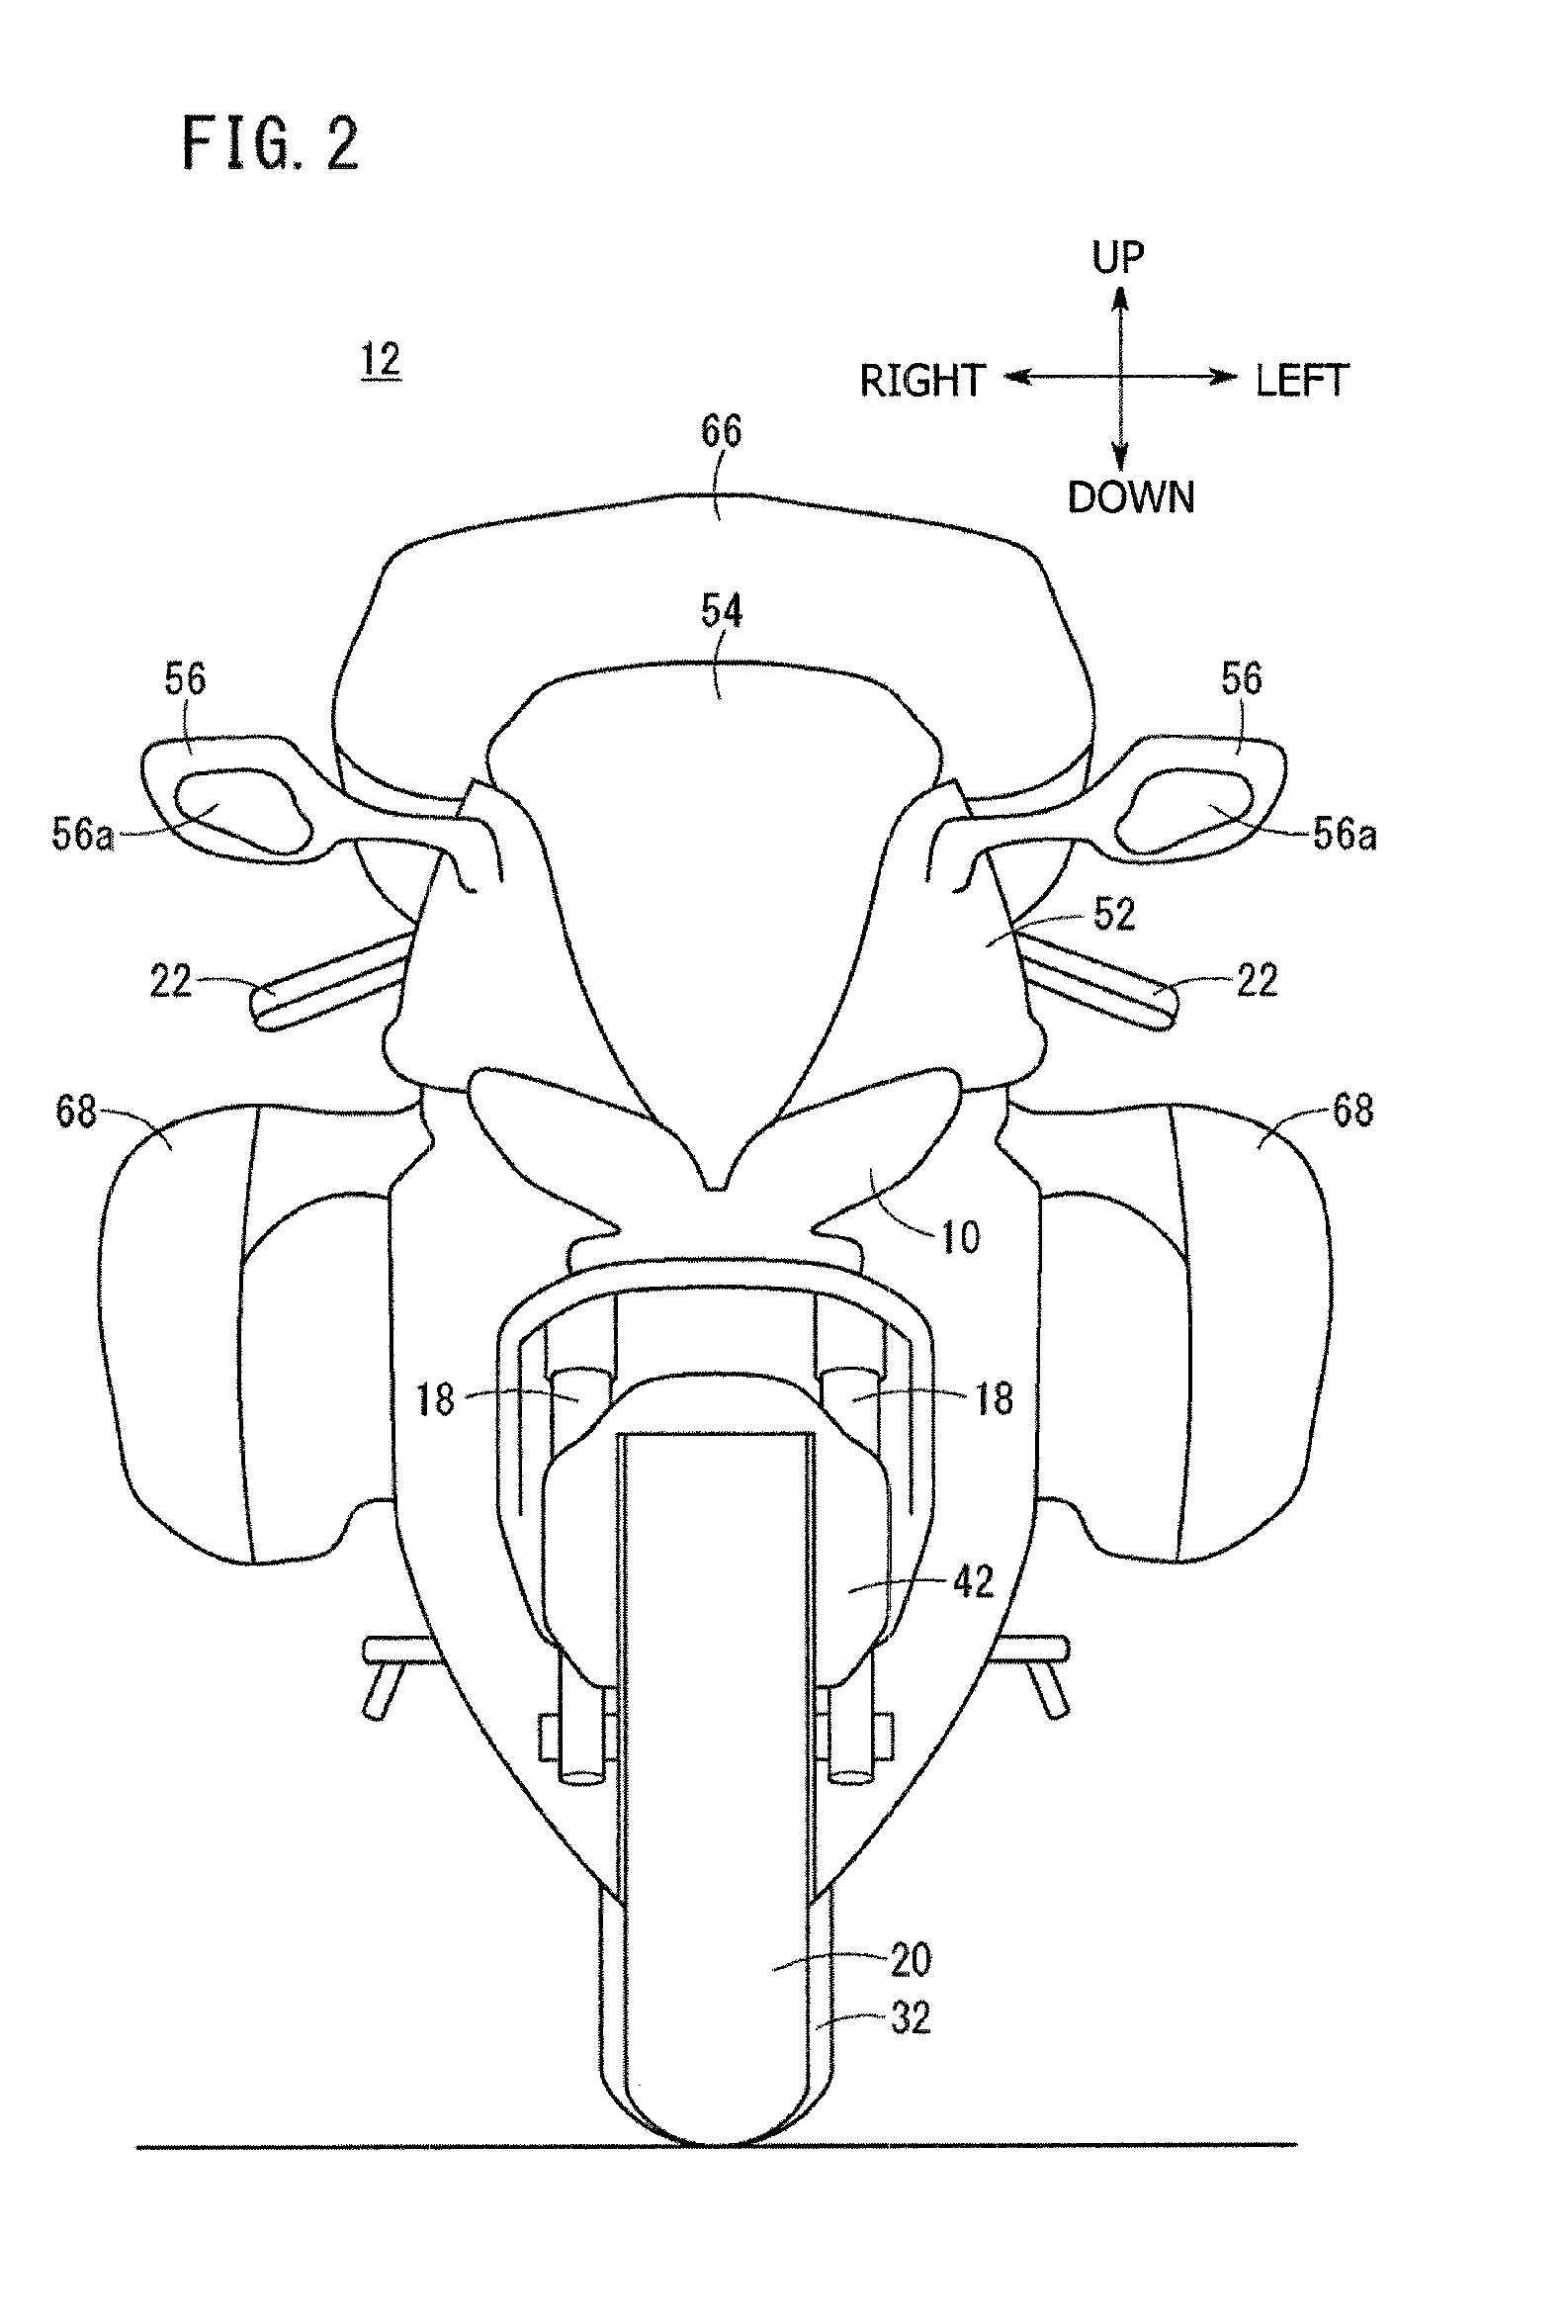 Headlight device for motorcycle